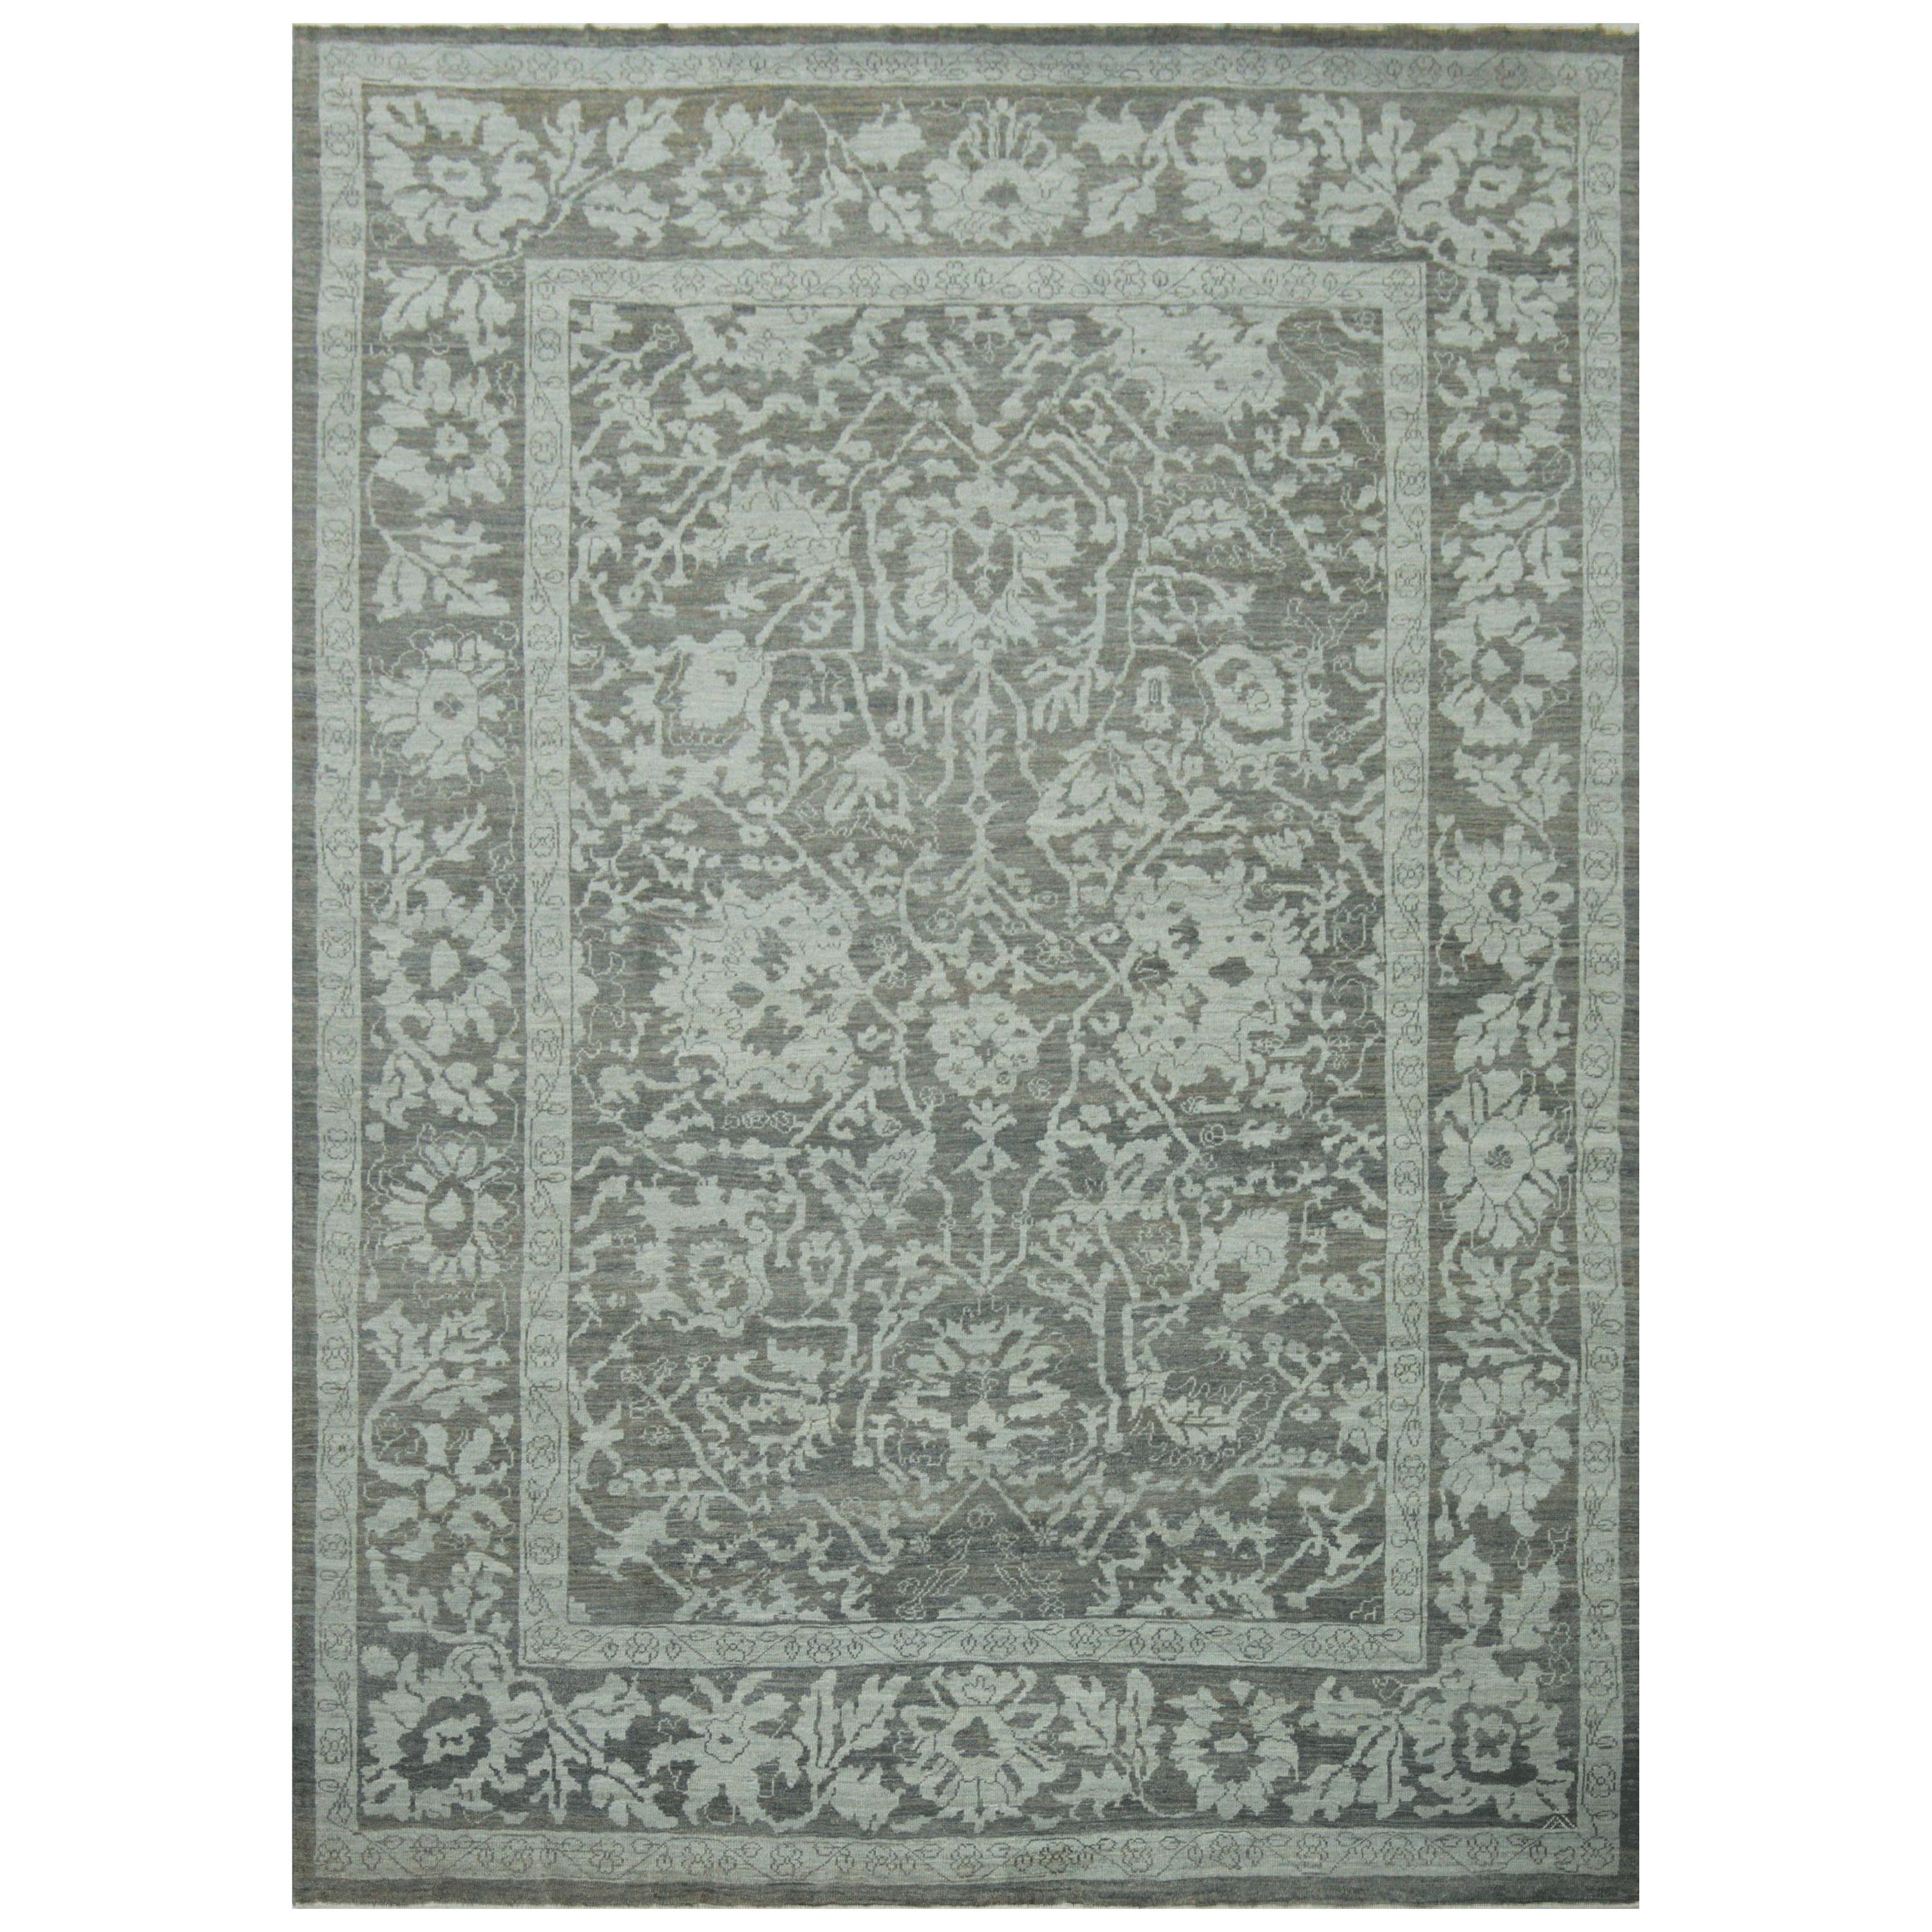 Contemporary Turkish Oushak Rug in Ivory with Gray and Navy Floral Patterns